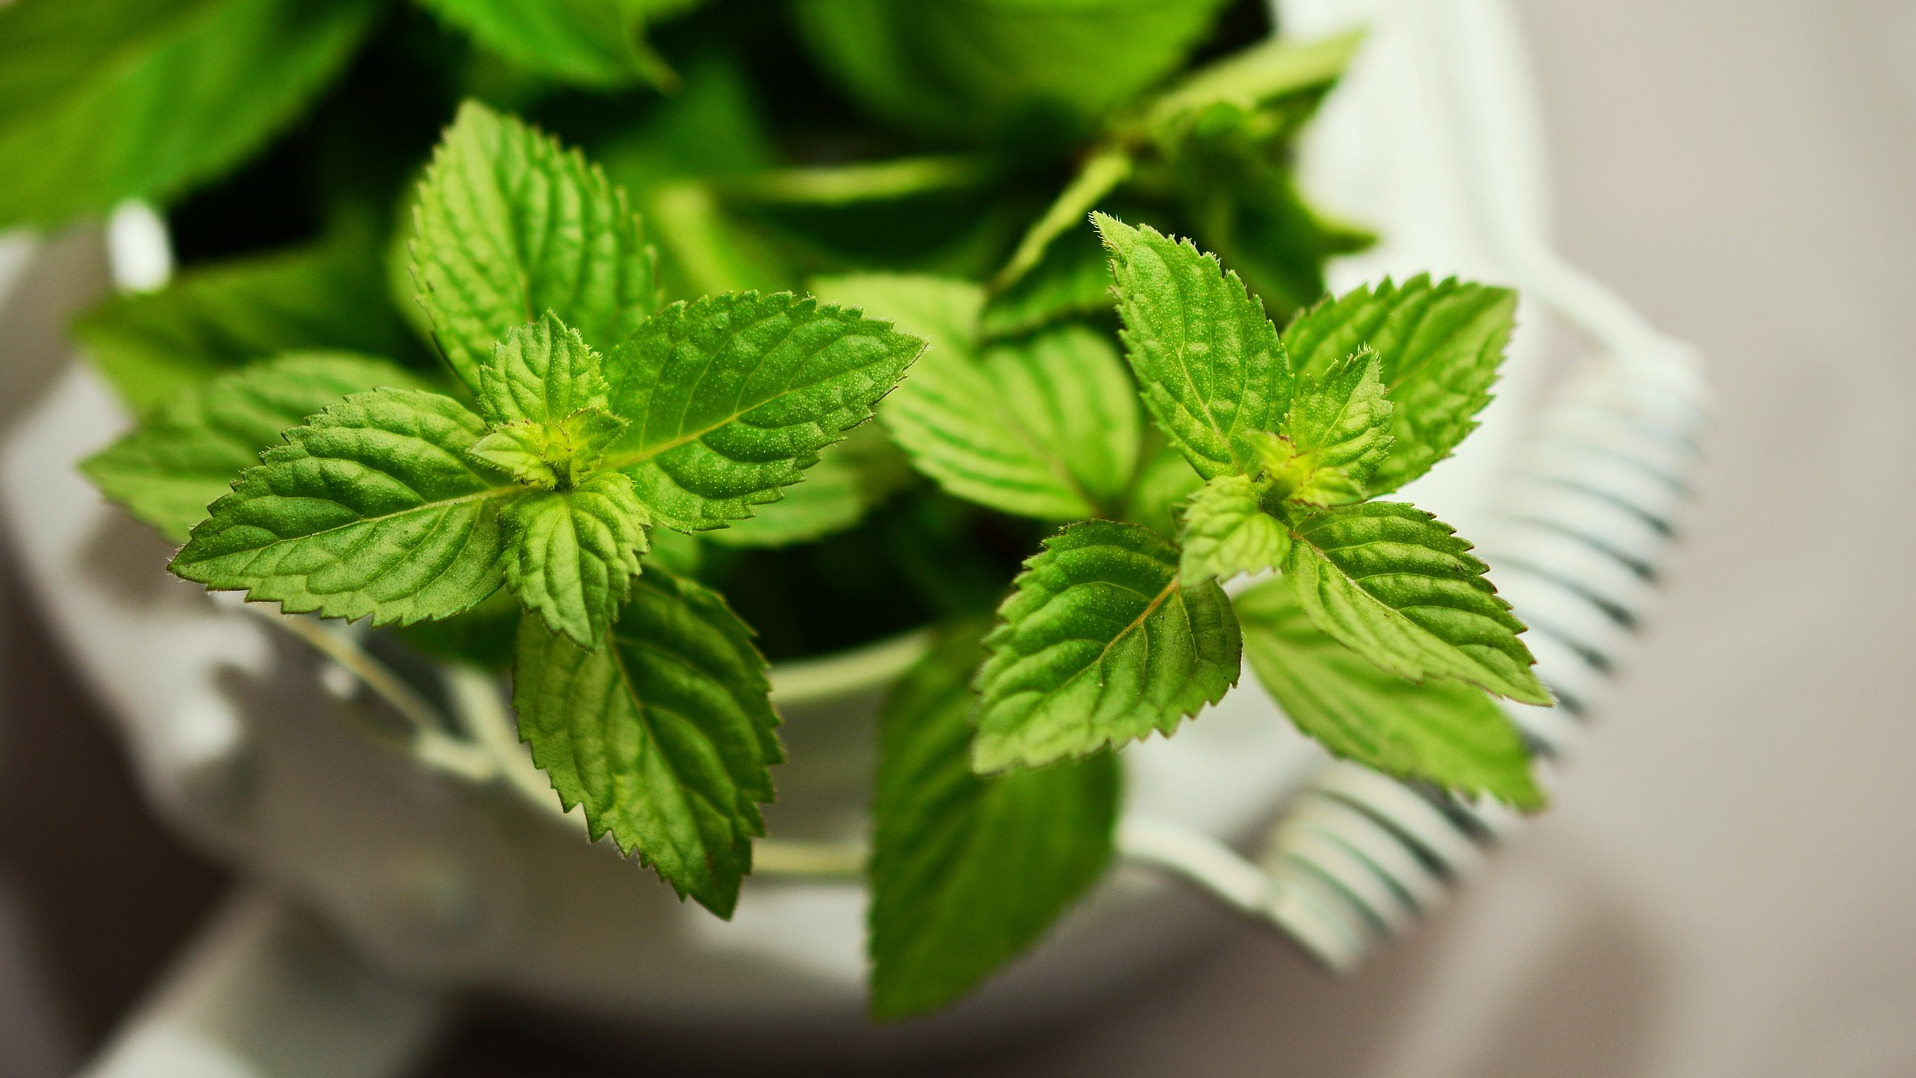 Healthy Peppermint Plant used to make Peppermint Essential Oil